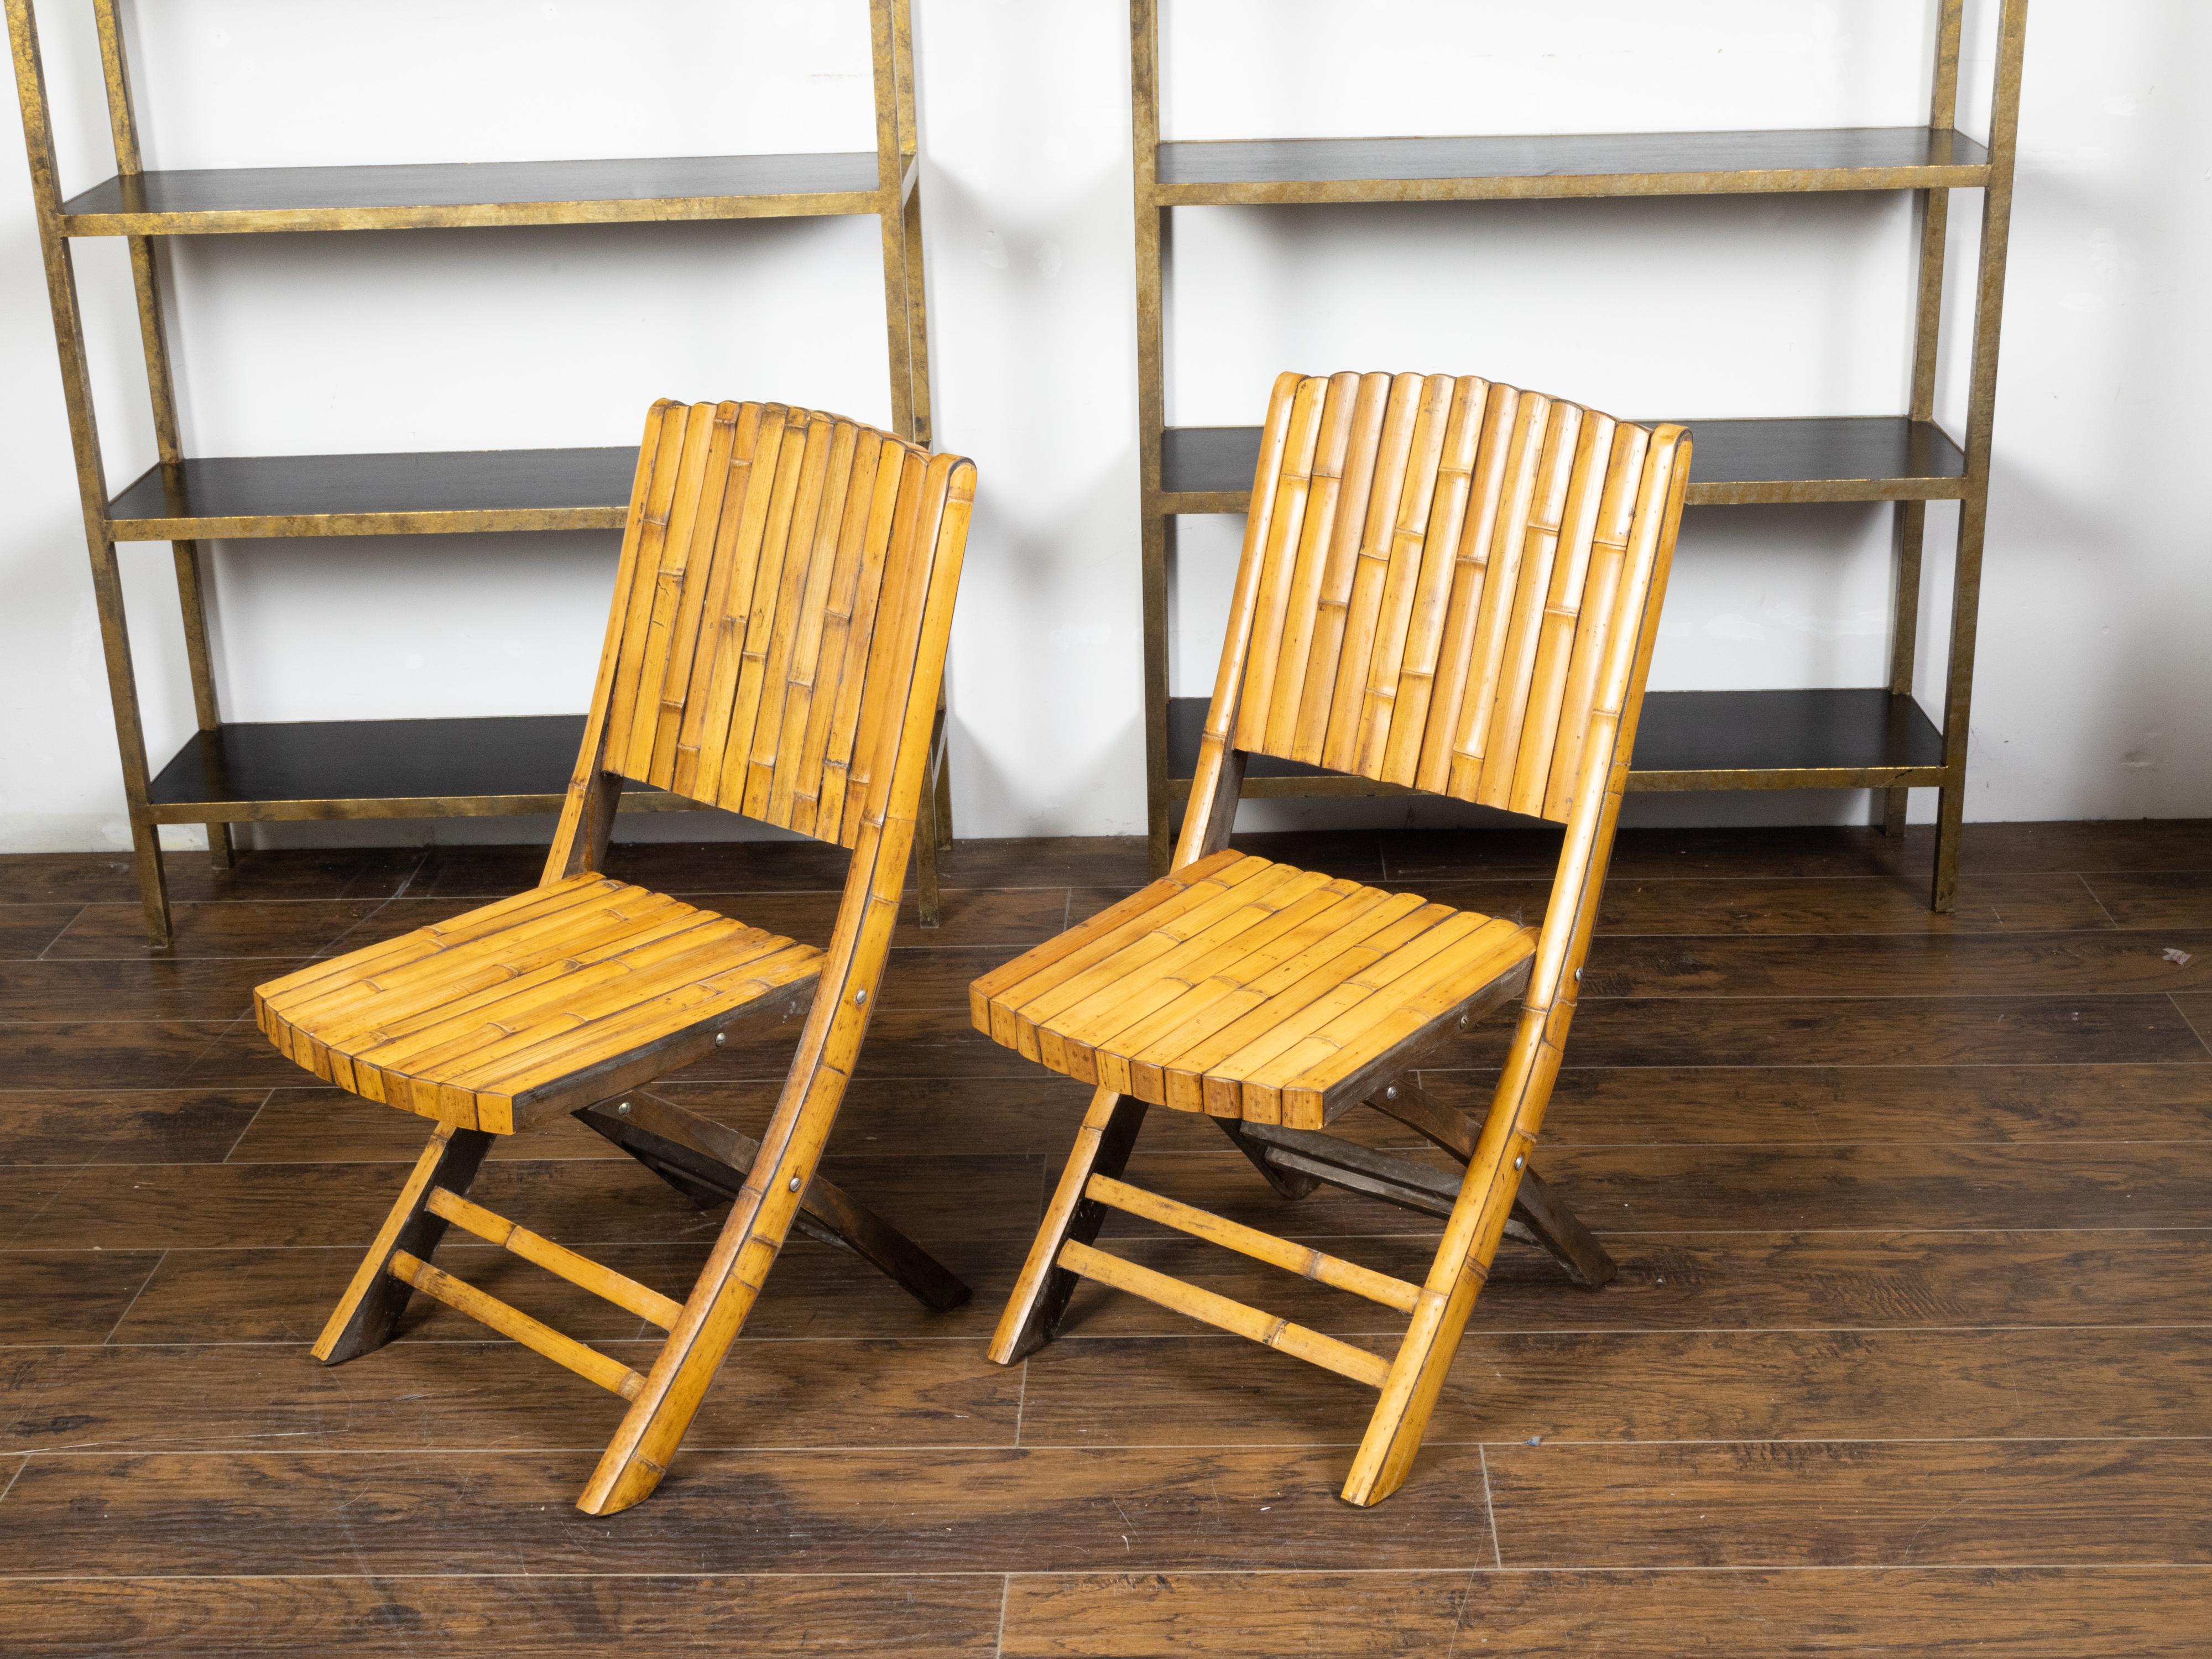 Pair of Midcentury Bamboo Folding Chairs with Slatted Design and Light Patina For Sale 4